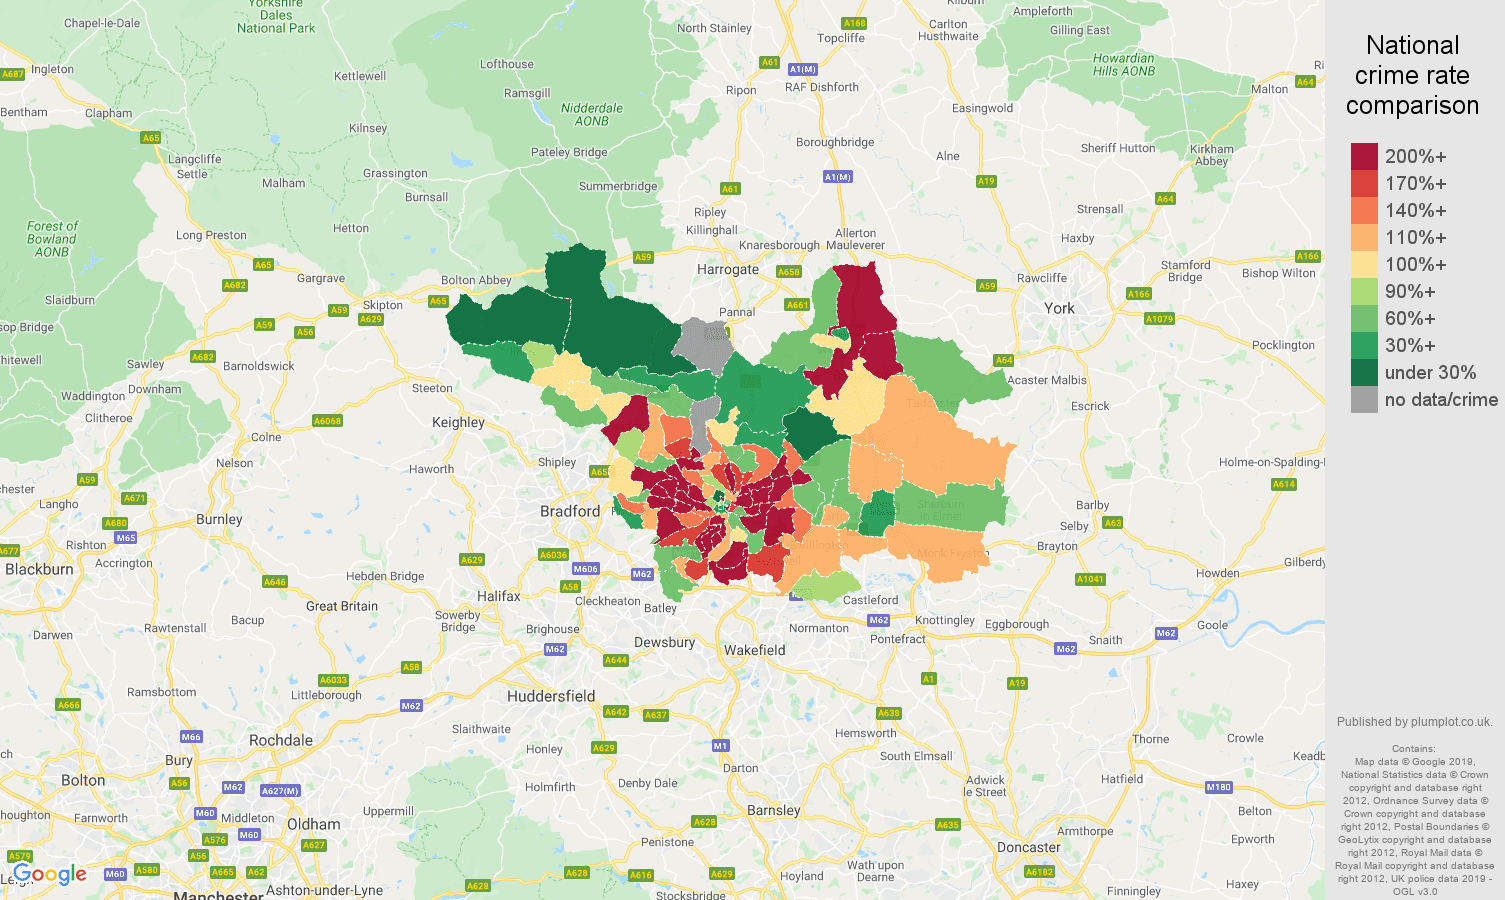 Leeds other crime rate comparison map